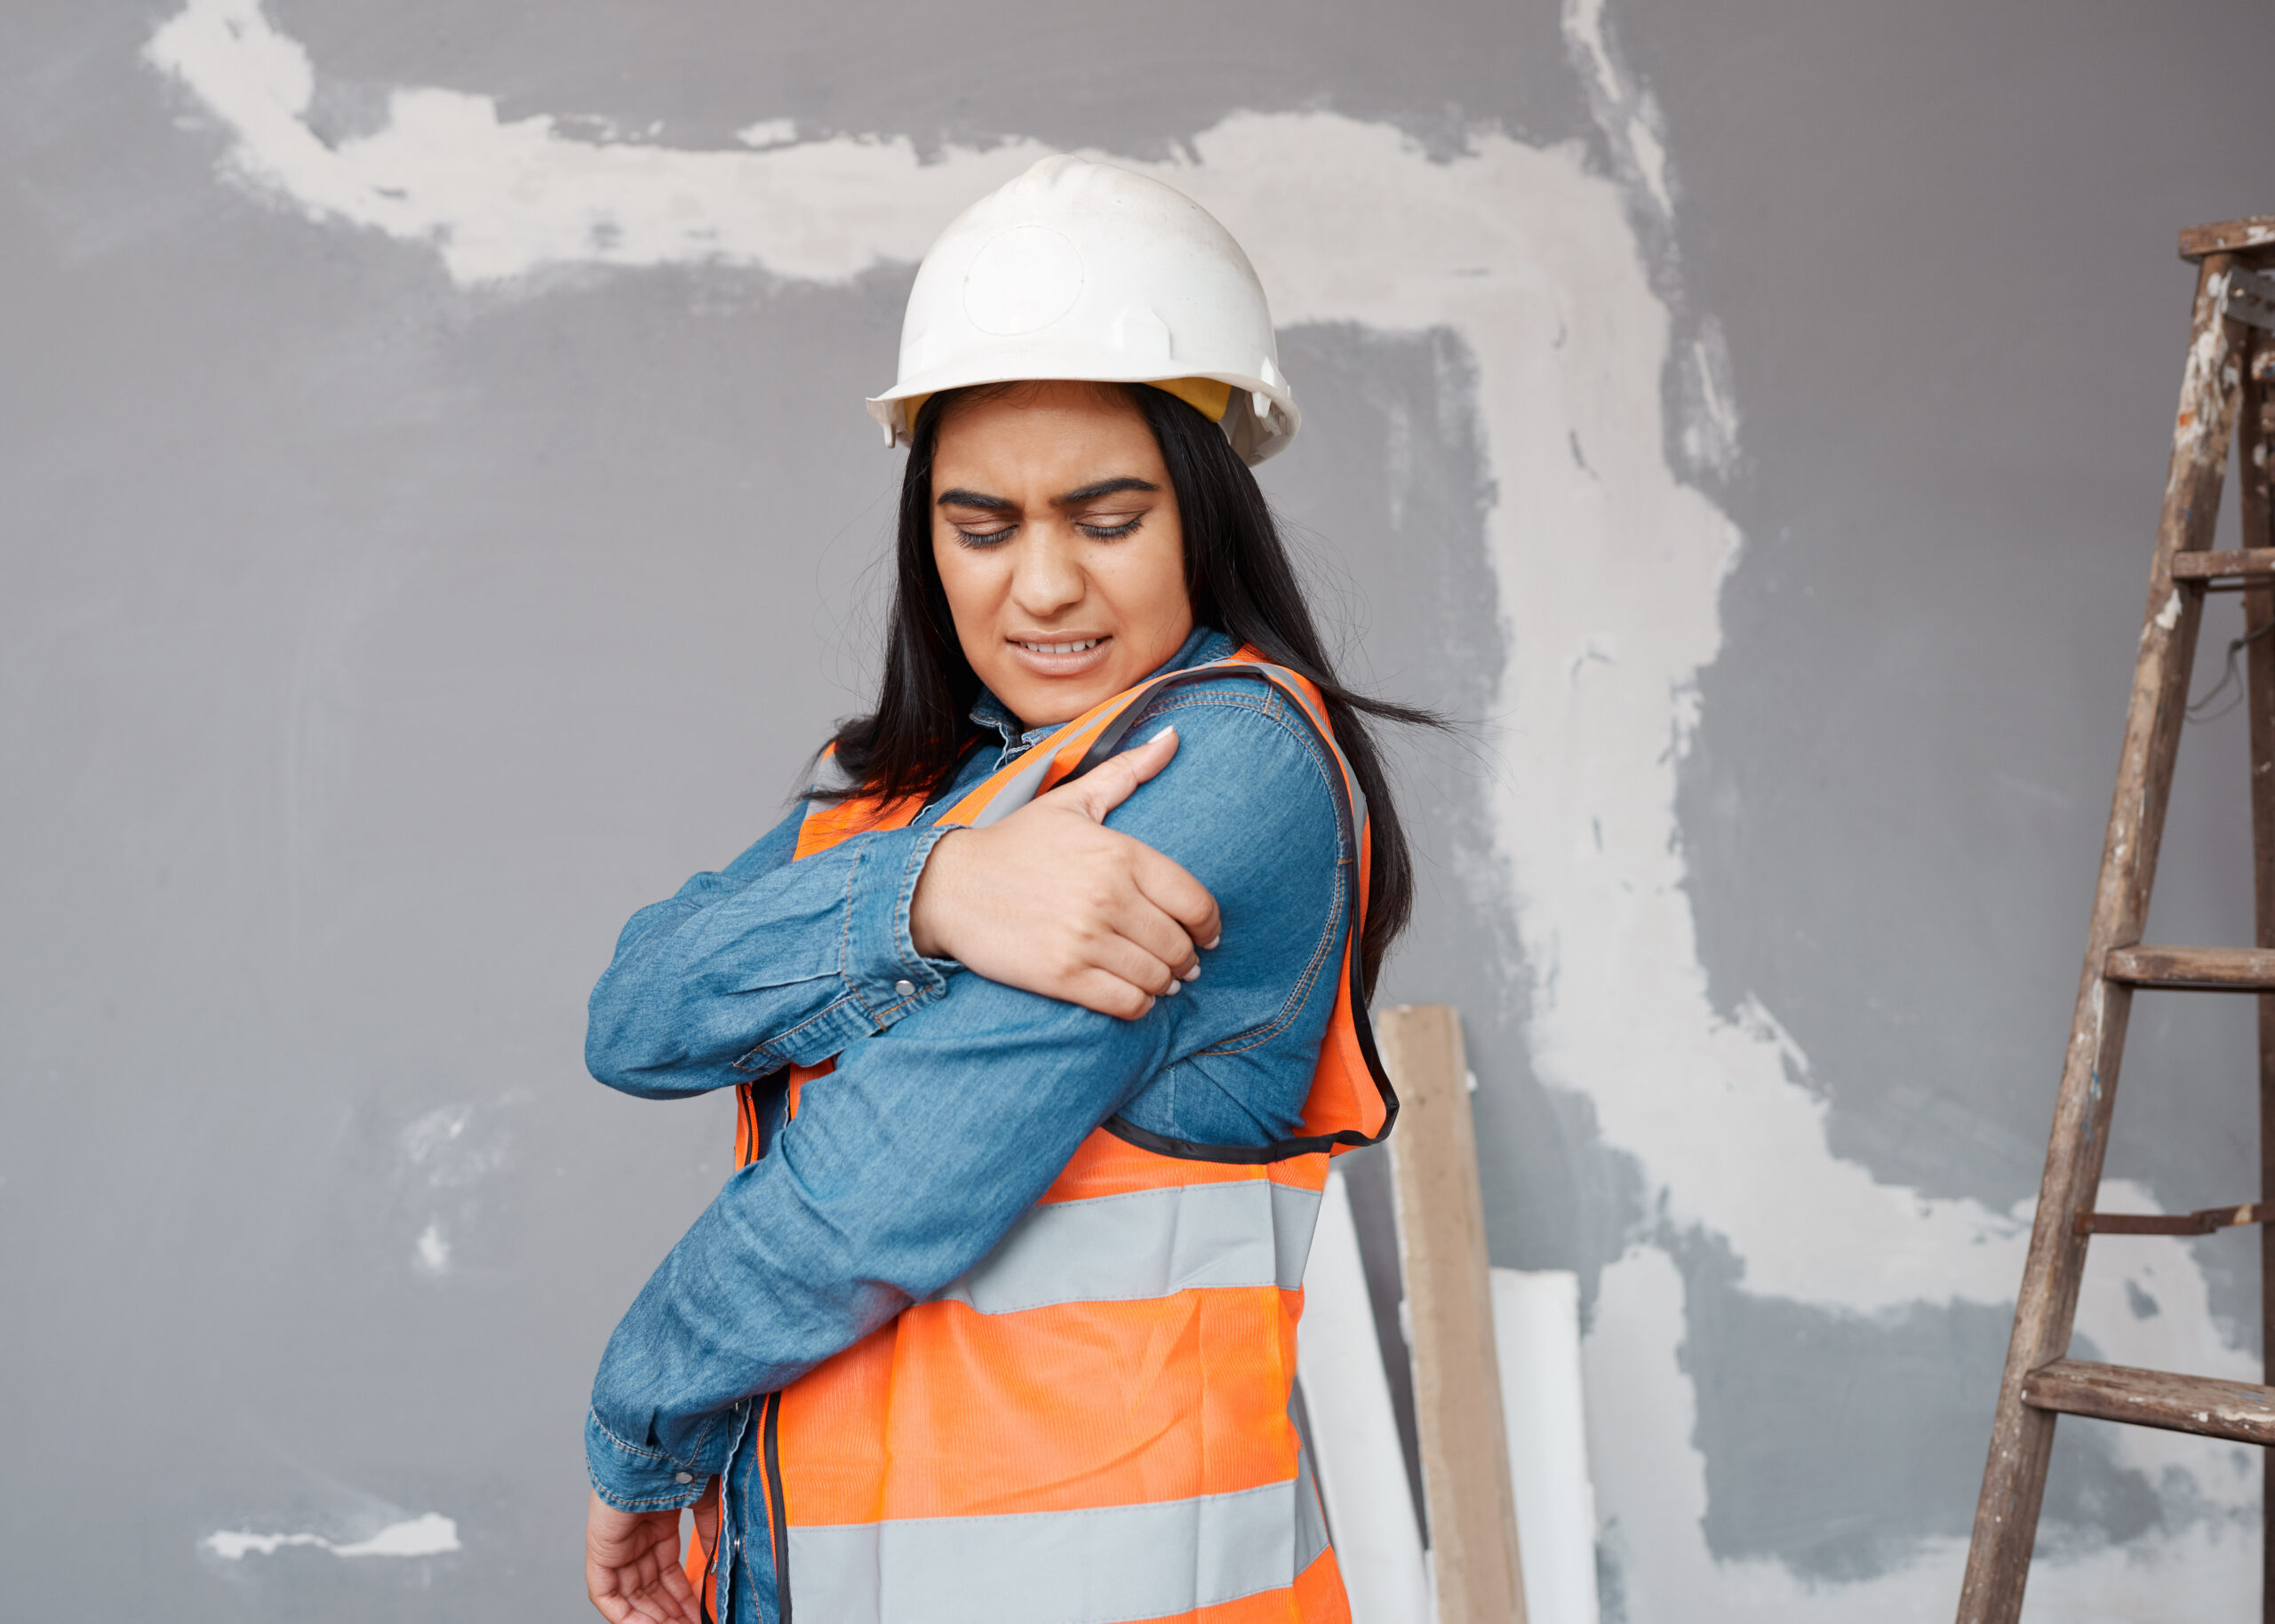 Occupational Health/Worker Compensation Injuries